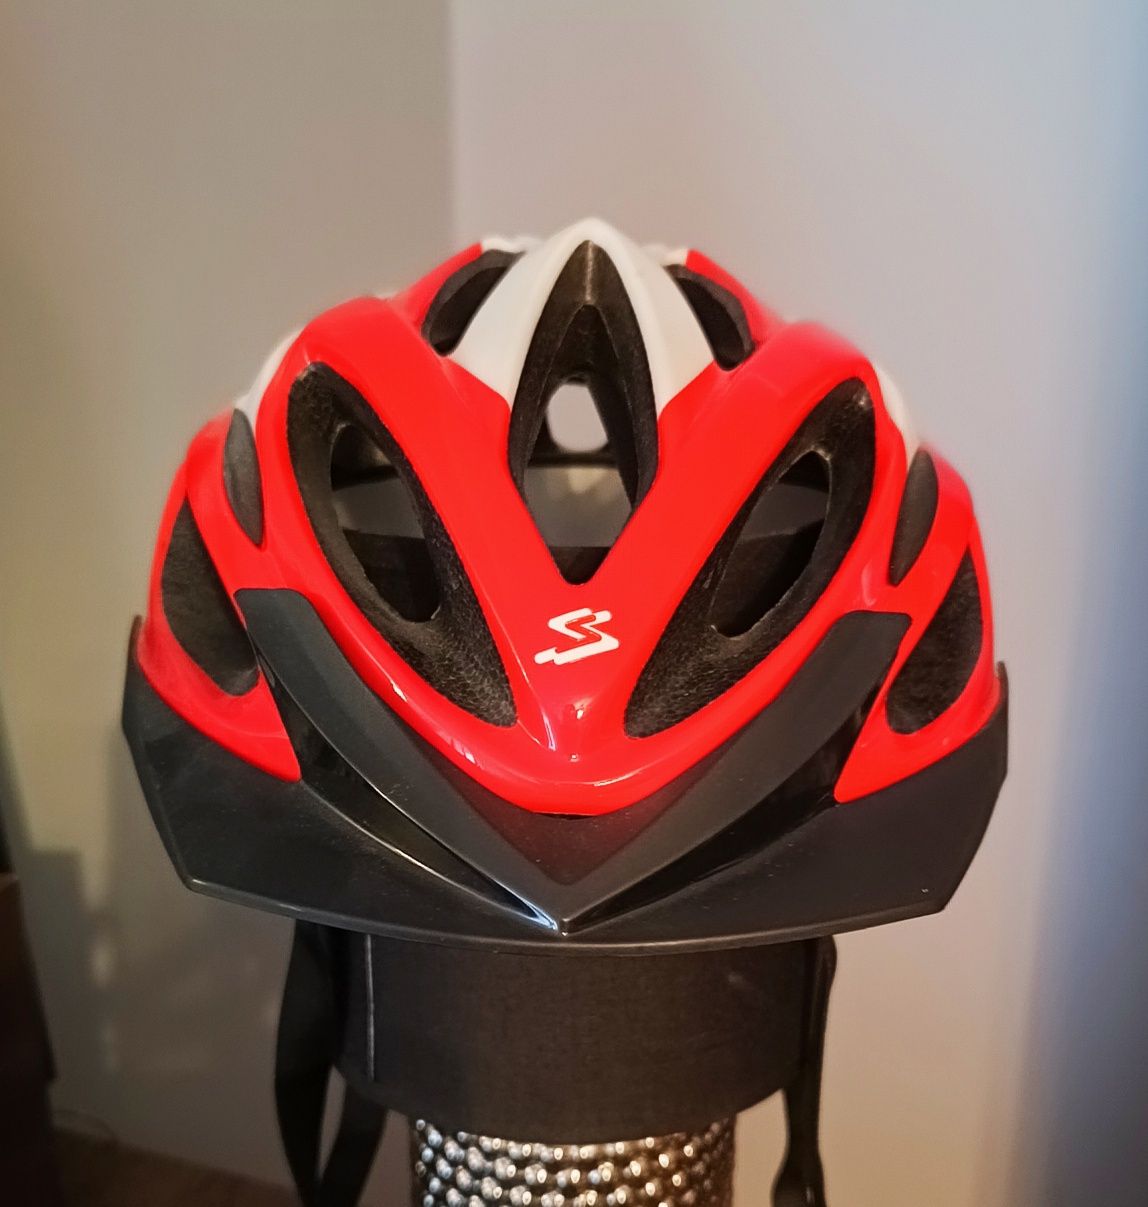 Kask rowerowy Spiuk Tamera M-L (58-62) nowy